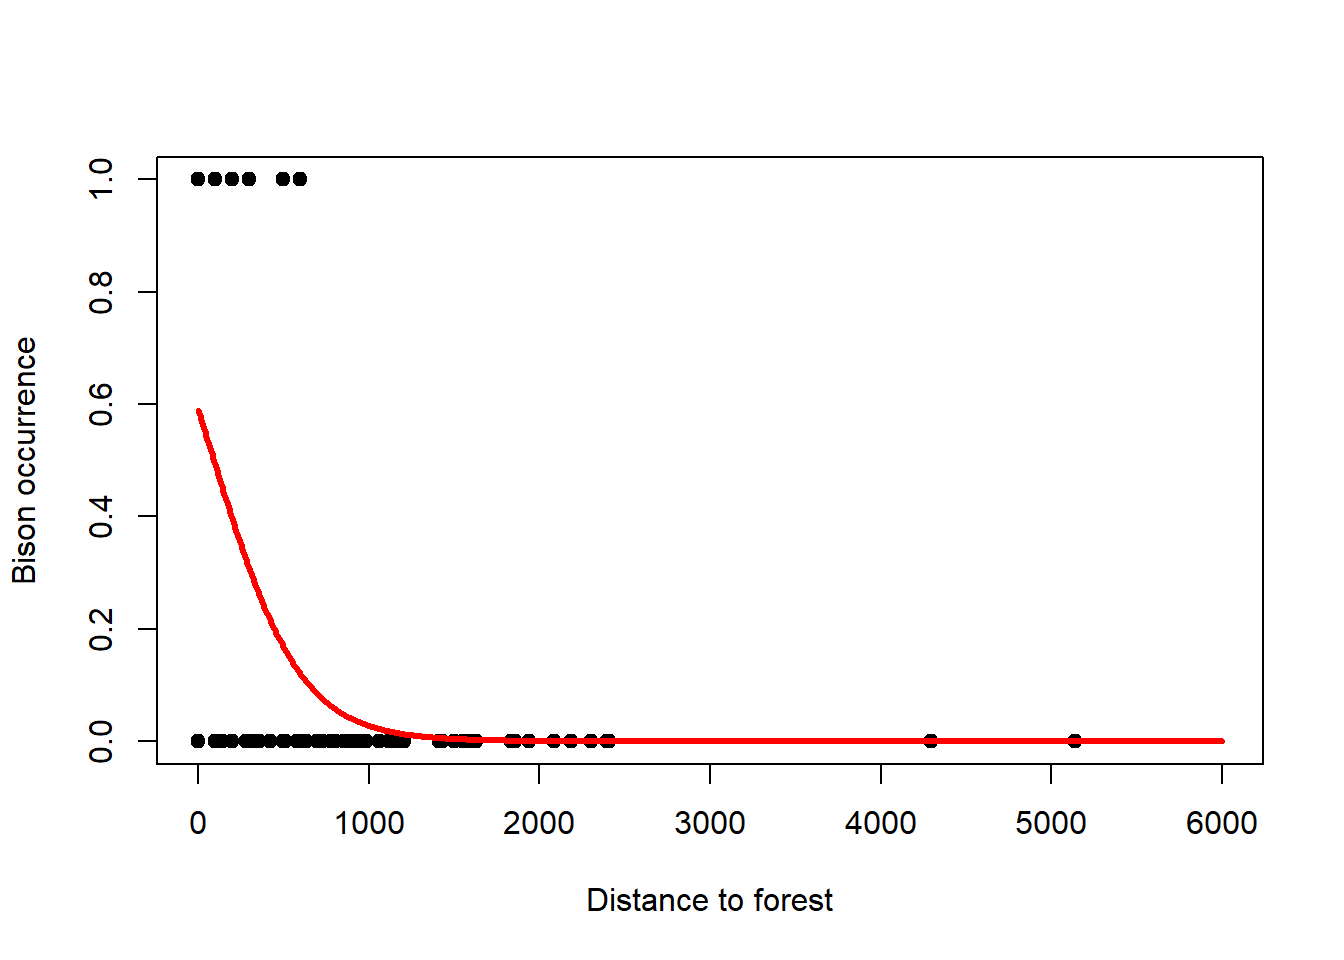 Left: Occurrence of bison as a function of forest distance with 1 indicating presence and 0 indicating absence. A logistic regression is fitted to these data that models the probability of occurrence. Note, due to the overlap of 1s and 0s to the left of the graph, the probability of occurrence comes out at only 0.6 for zero distance. Right: This can be better seen when plotting so called binned averages of the occurrence indicator against forest distance (open circles) after @gelman2020. Data from: [Benjamin Bleyhl](https://www.geographie.hu-berlin.de/en/professorships/biogeography/people/current-people/bleyhl).